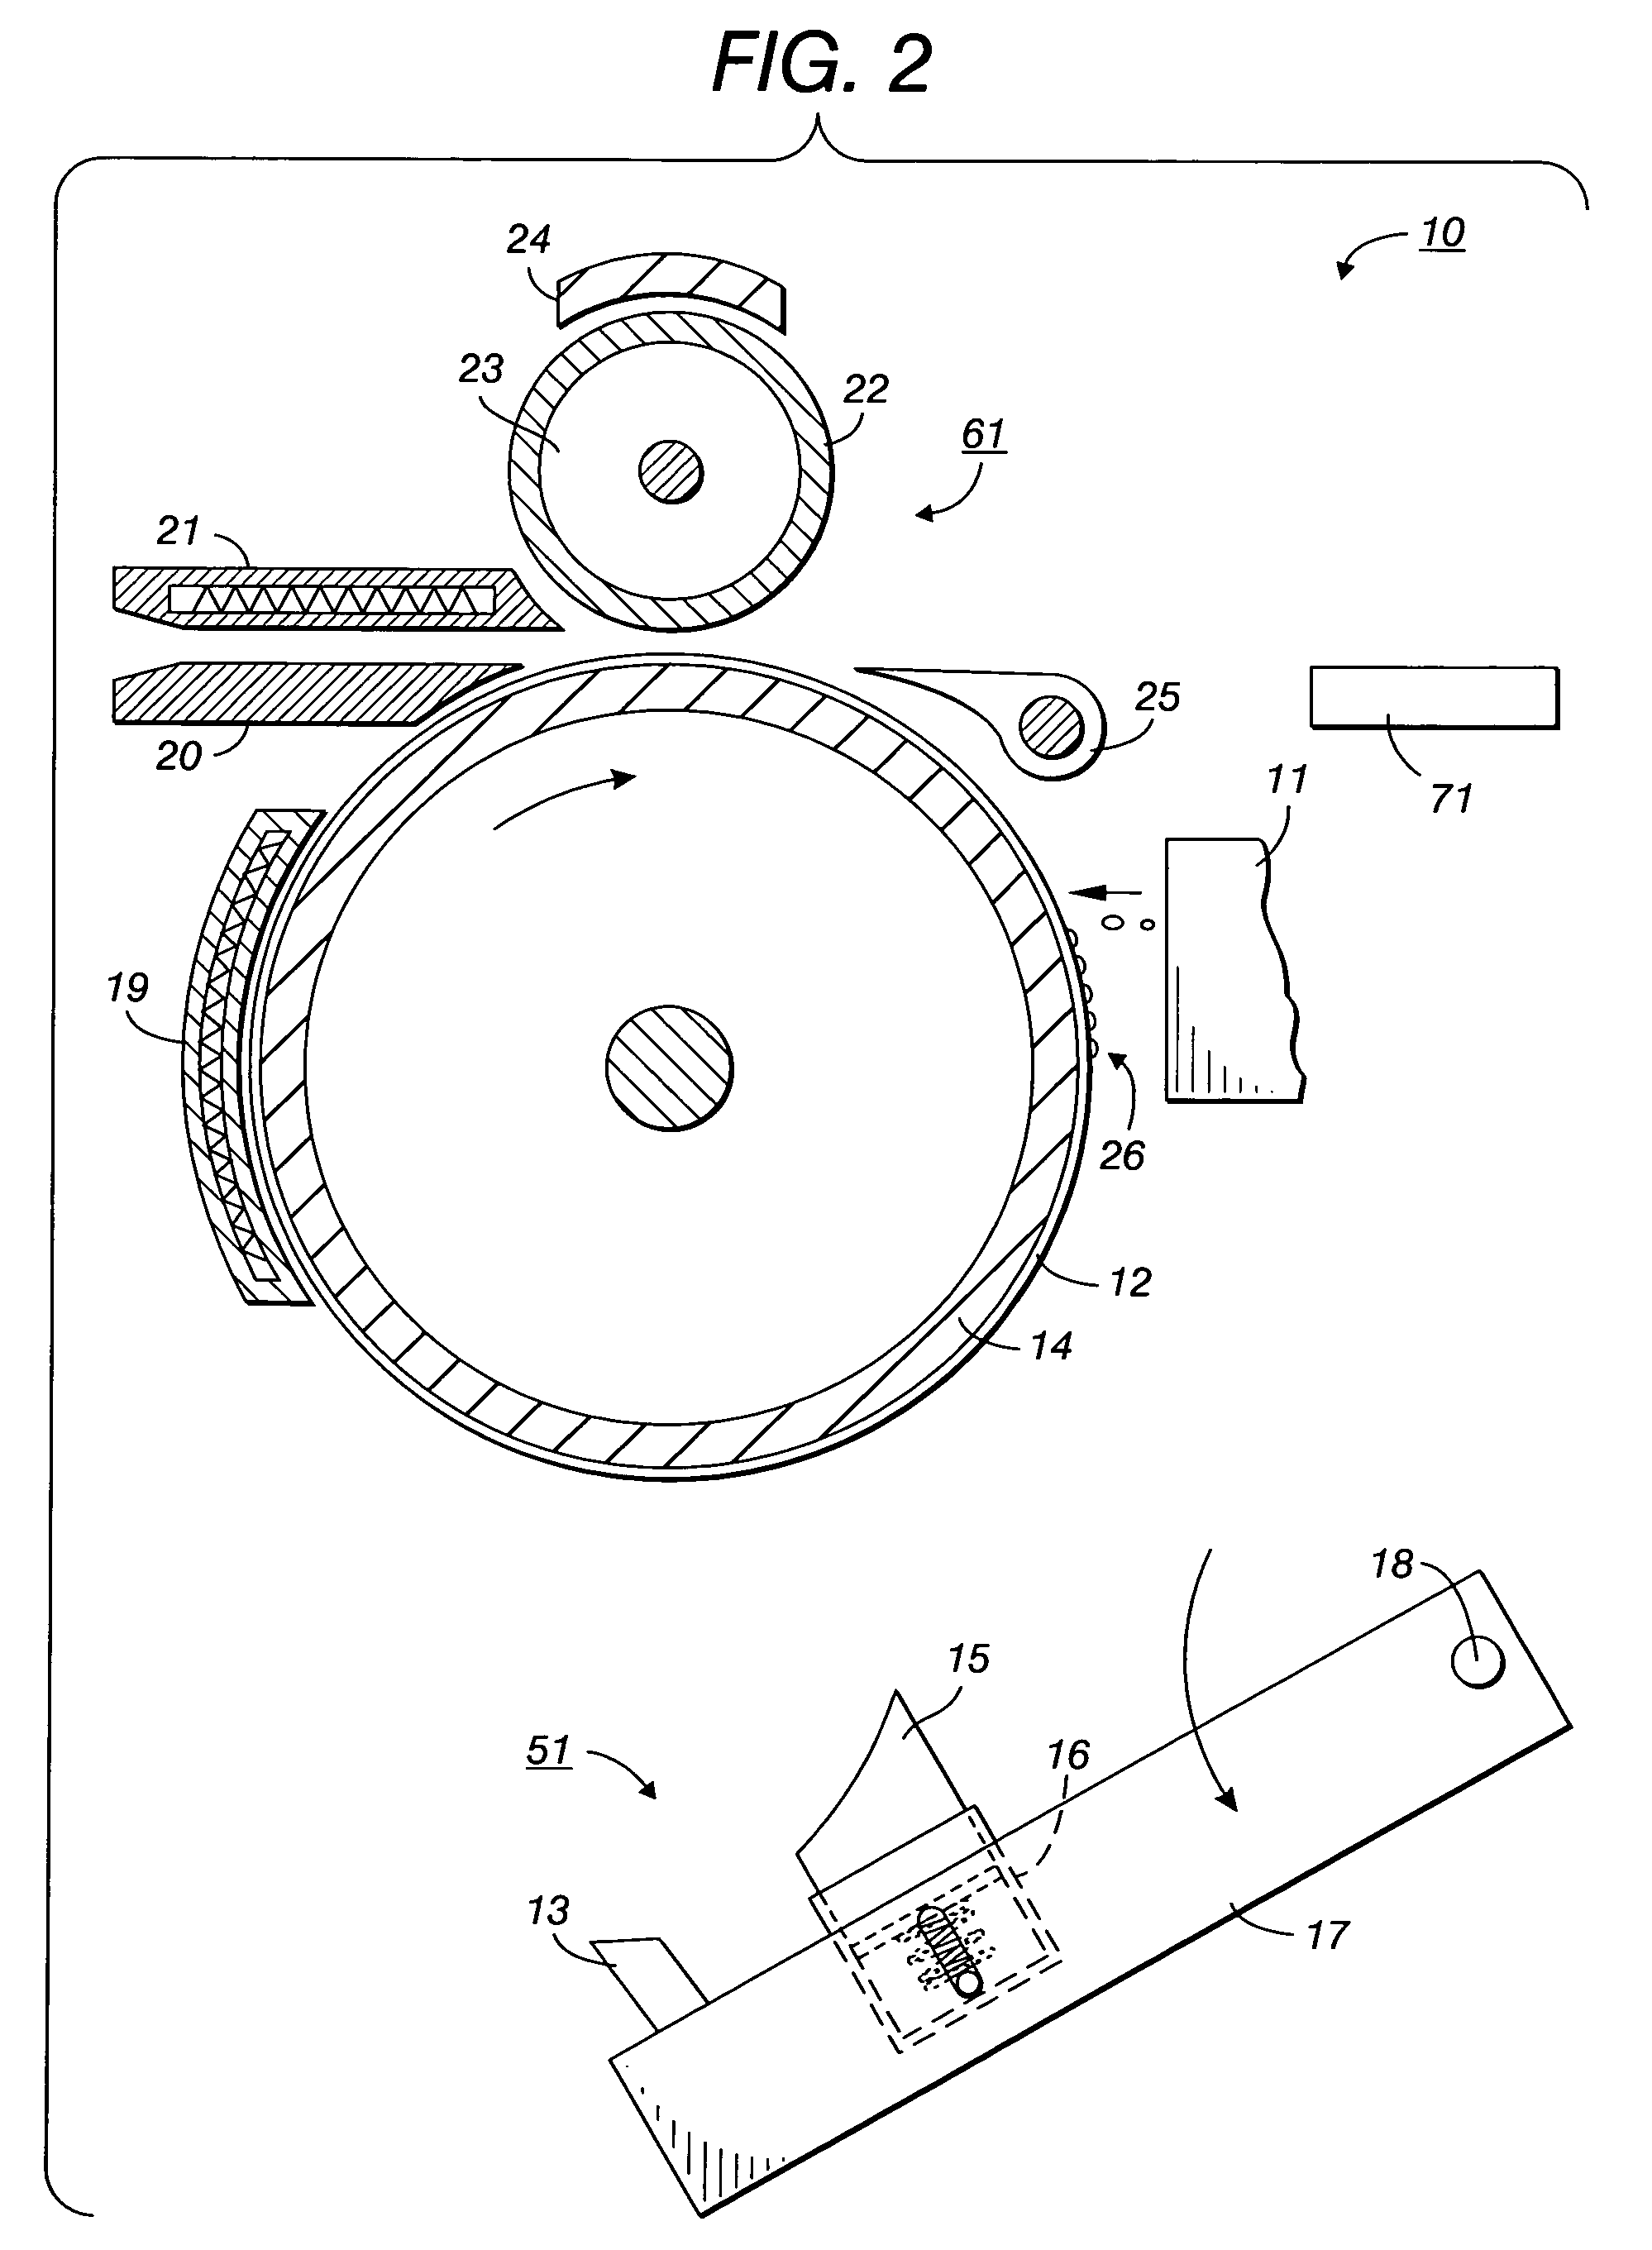 Printing apparatus and processes employing intermediate transfer with molten intermediate transfer materials